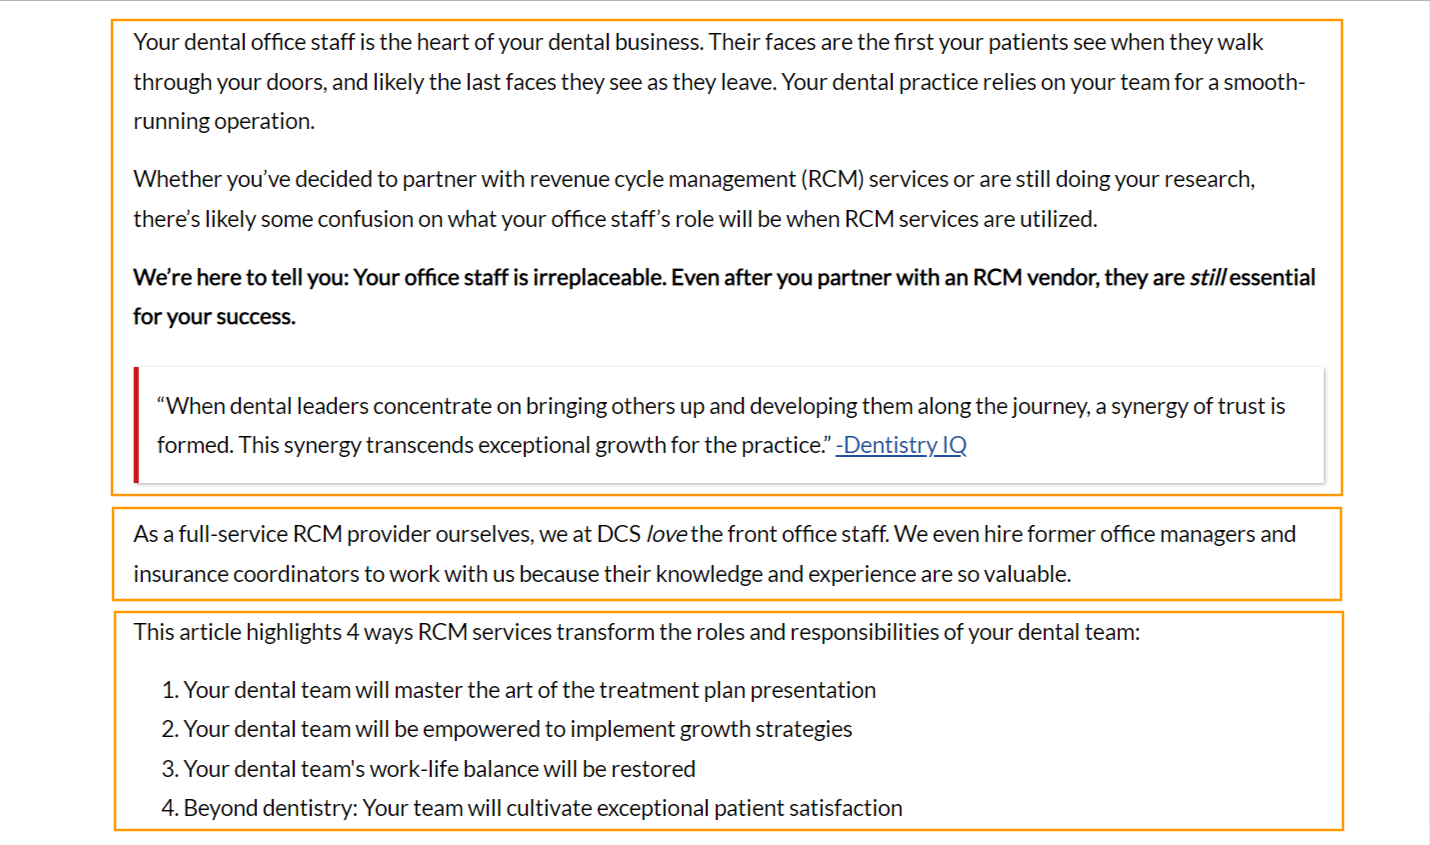 4-ways-RCM-services-optimize-the-roles-and-responsibilities-of-your-dental-team